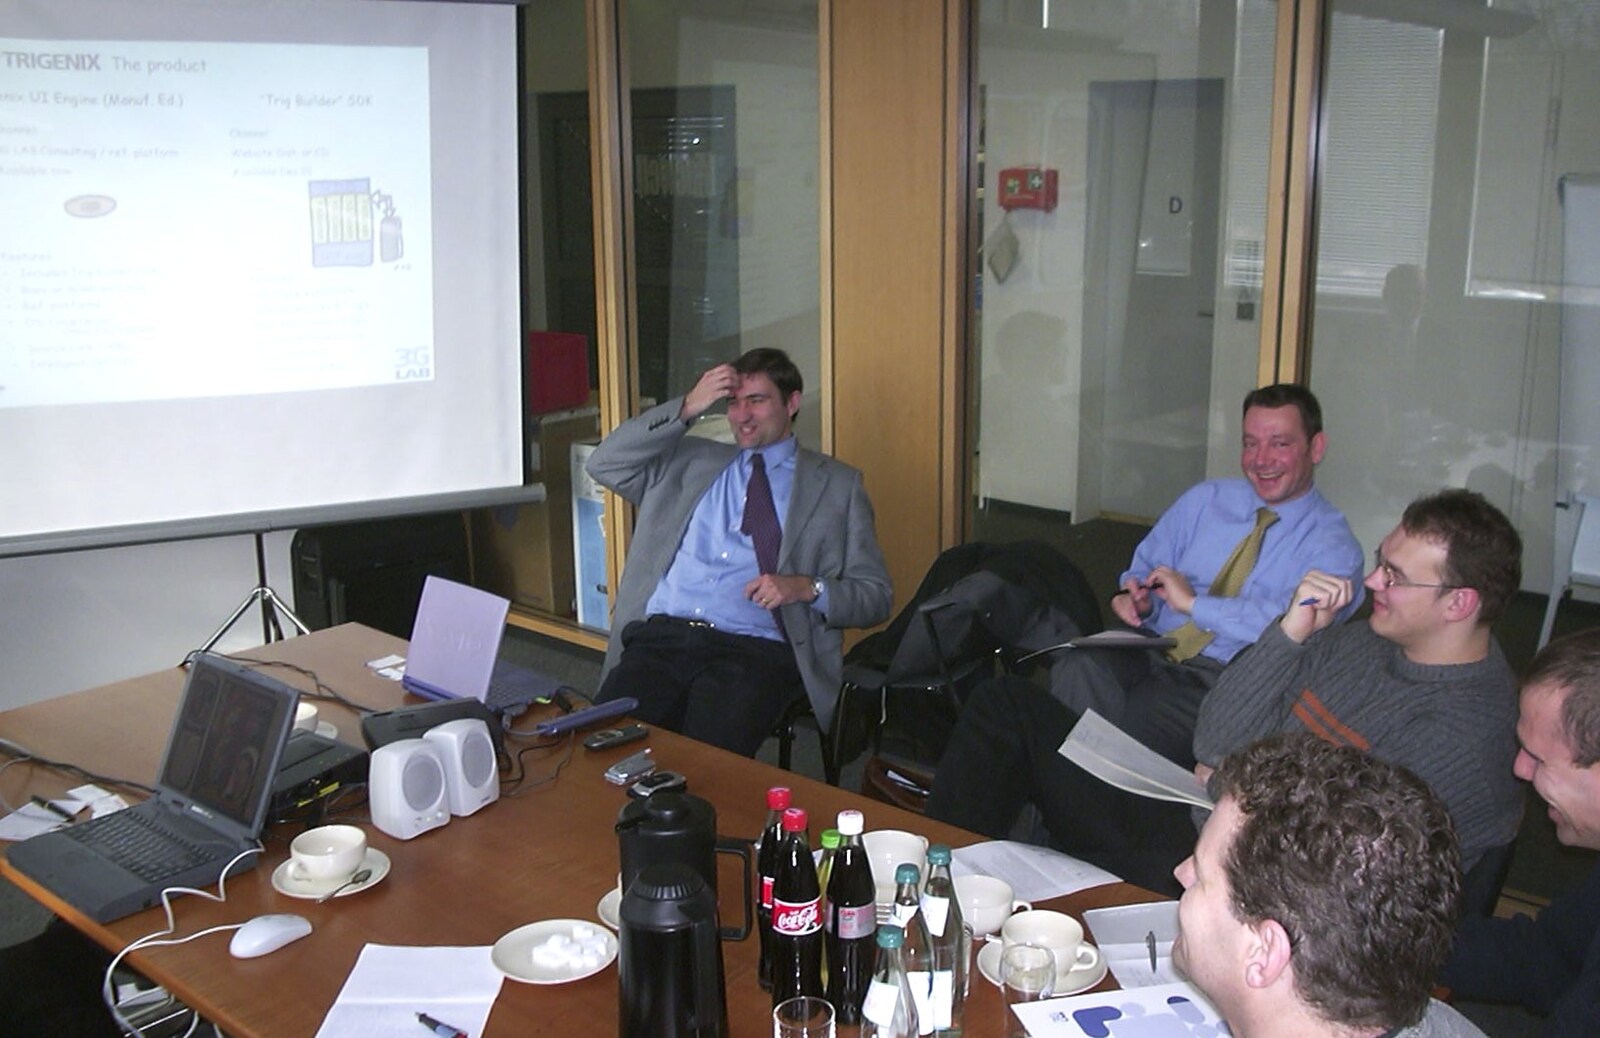 The presentation goes well from The 3G Lab Press Tour: Munich, Germany - 14th March 2001